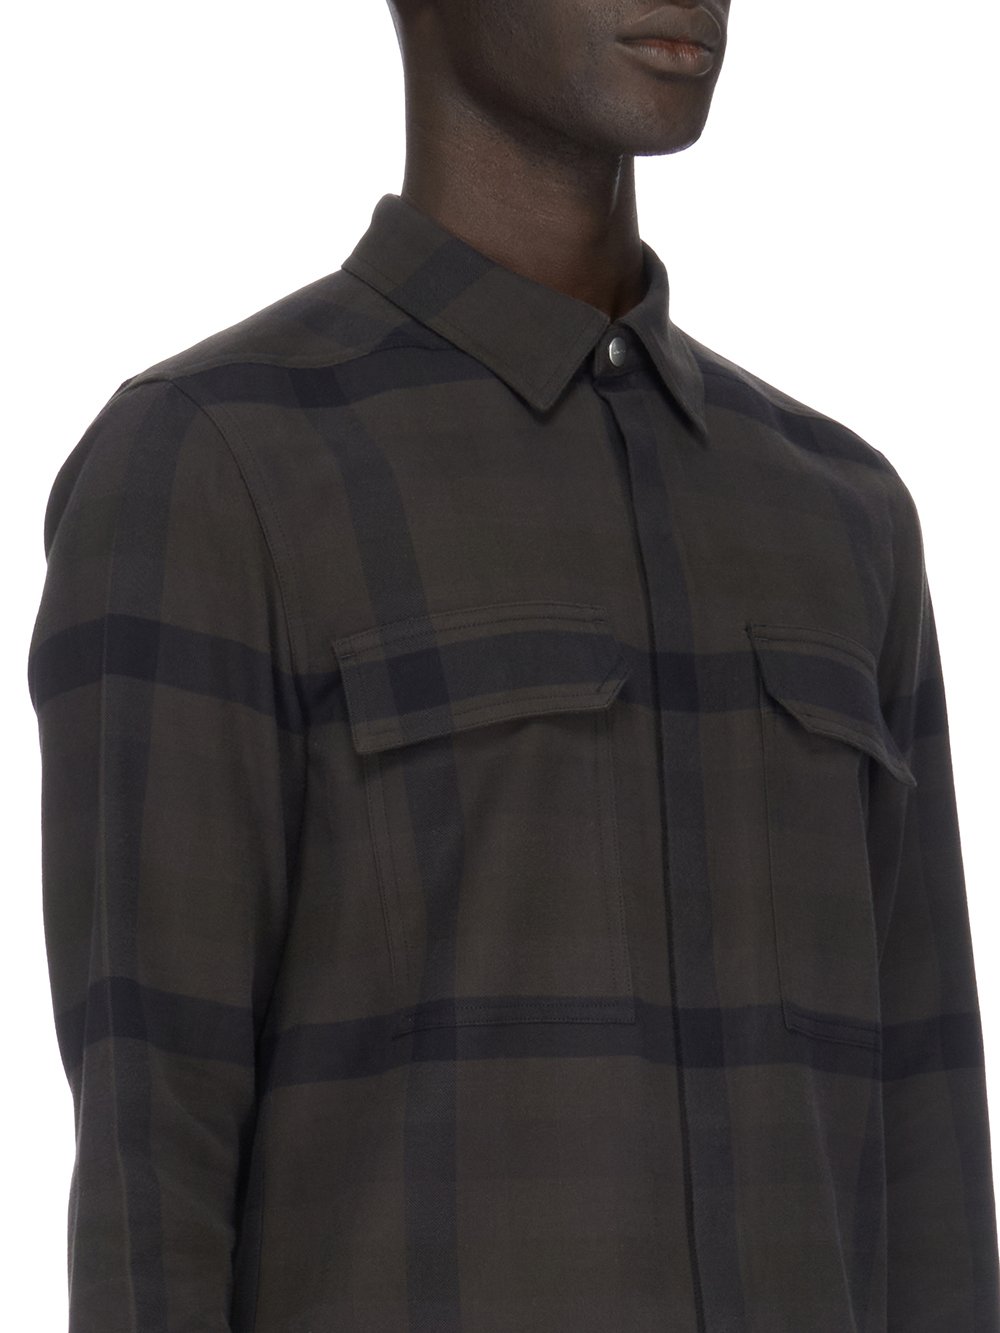 RICK OWENS FW23 LUXOR OUTERSHIRT IN COTTON PLAID